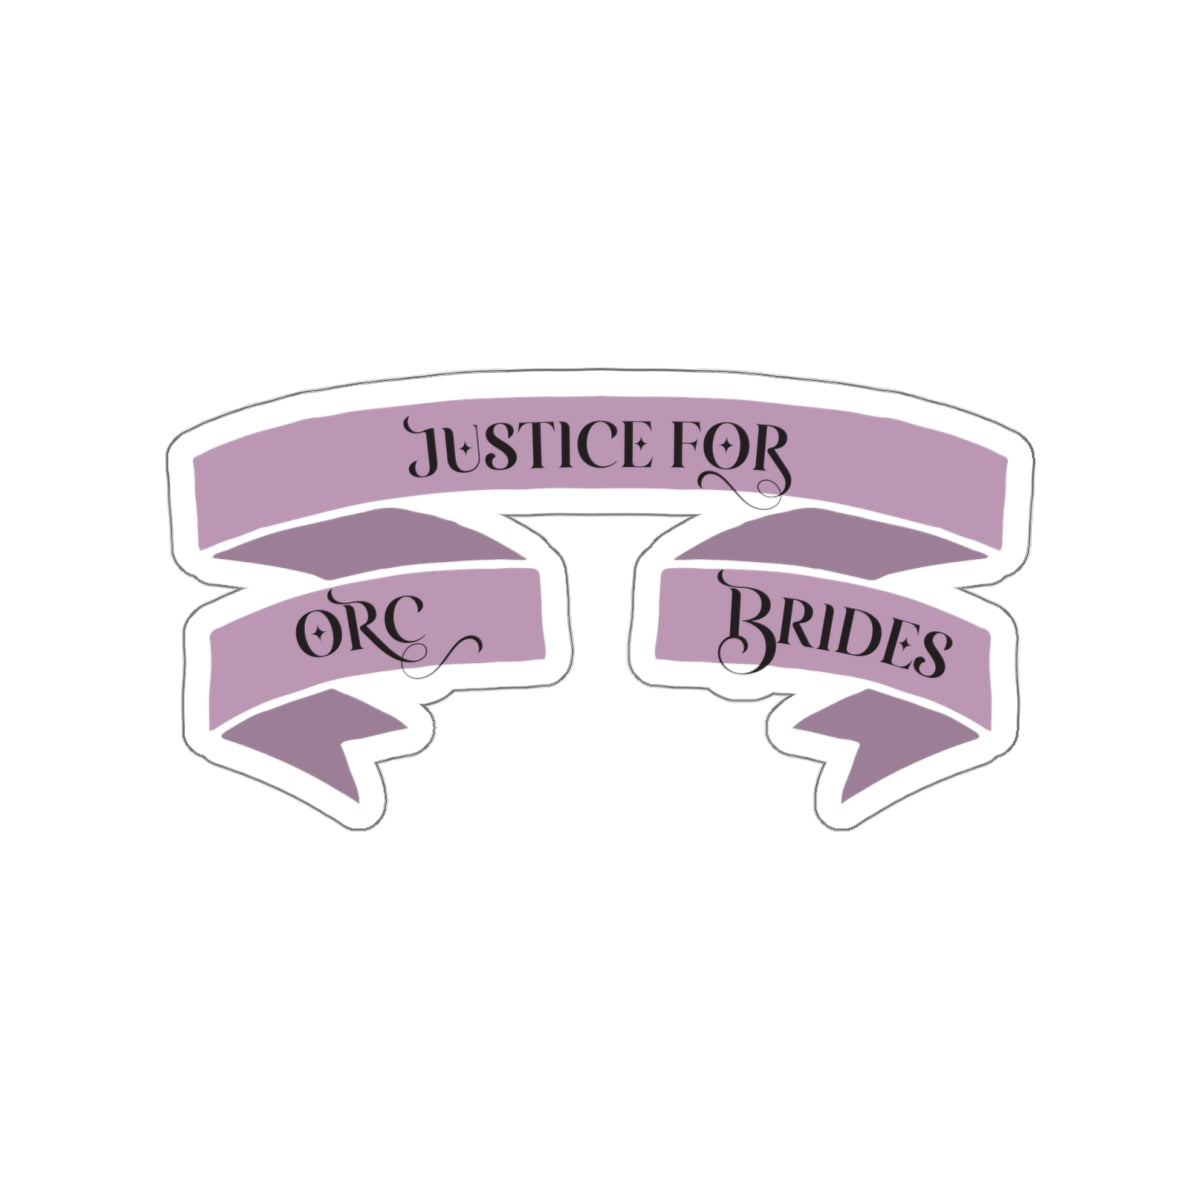 Justice for Orc Brides Banner Sticker